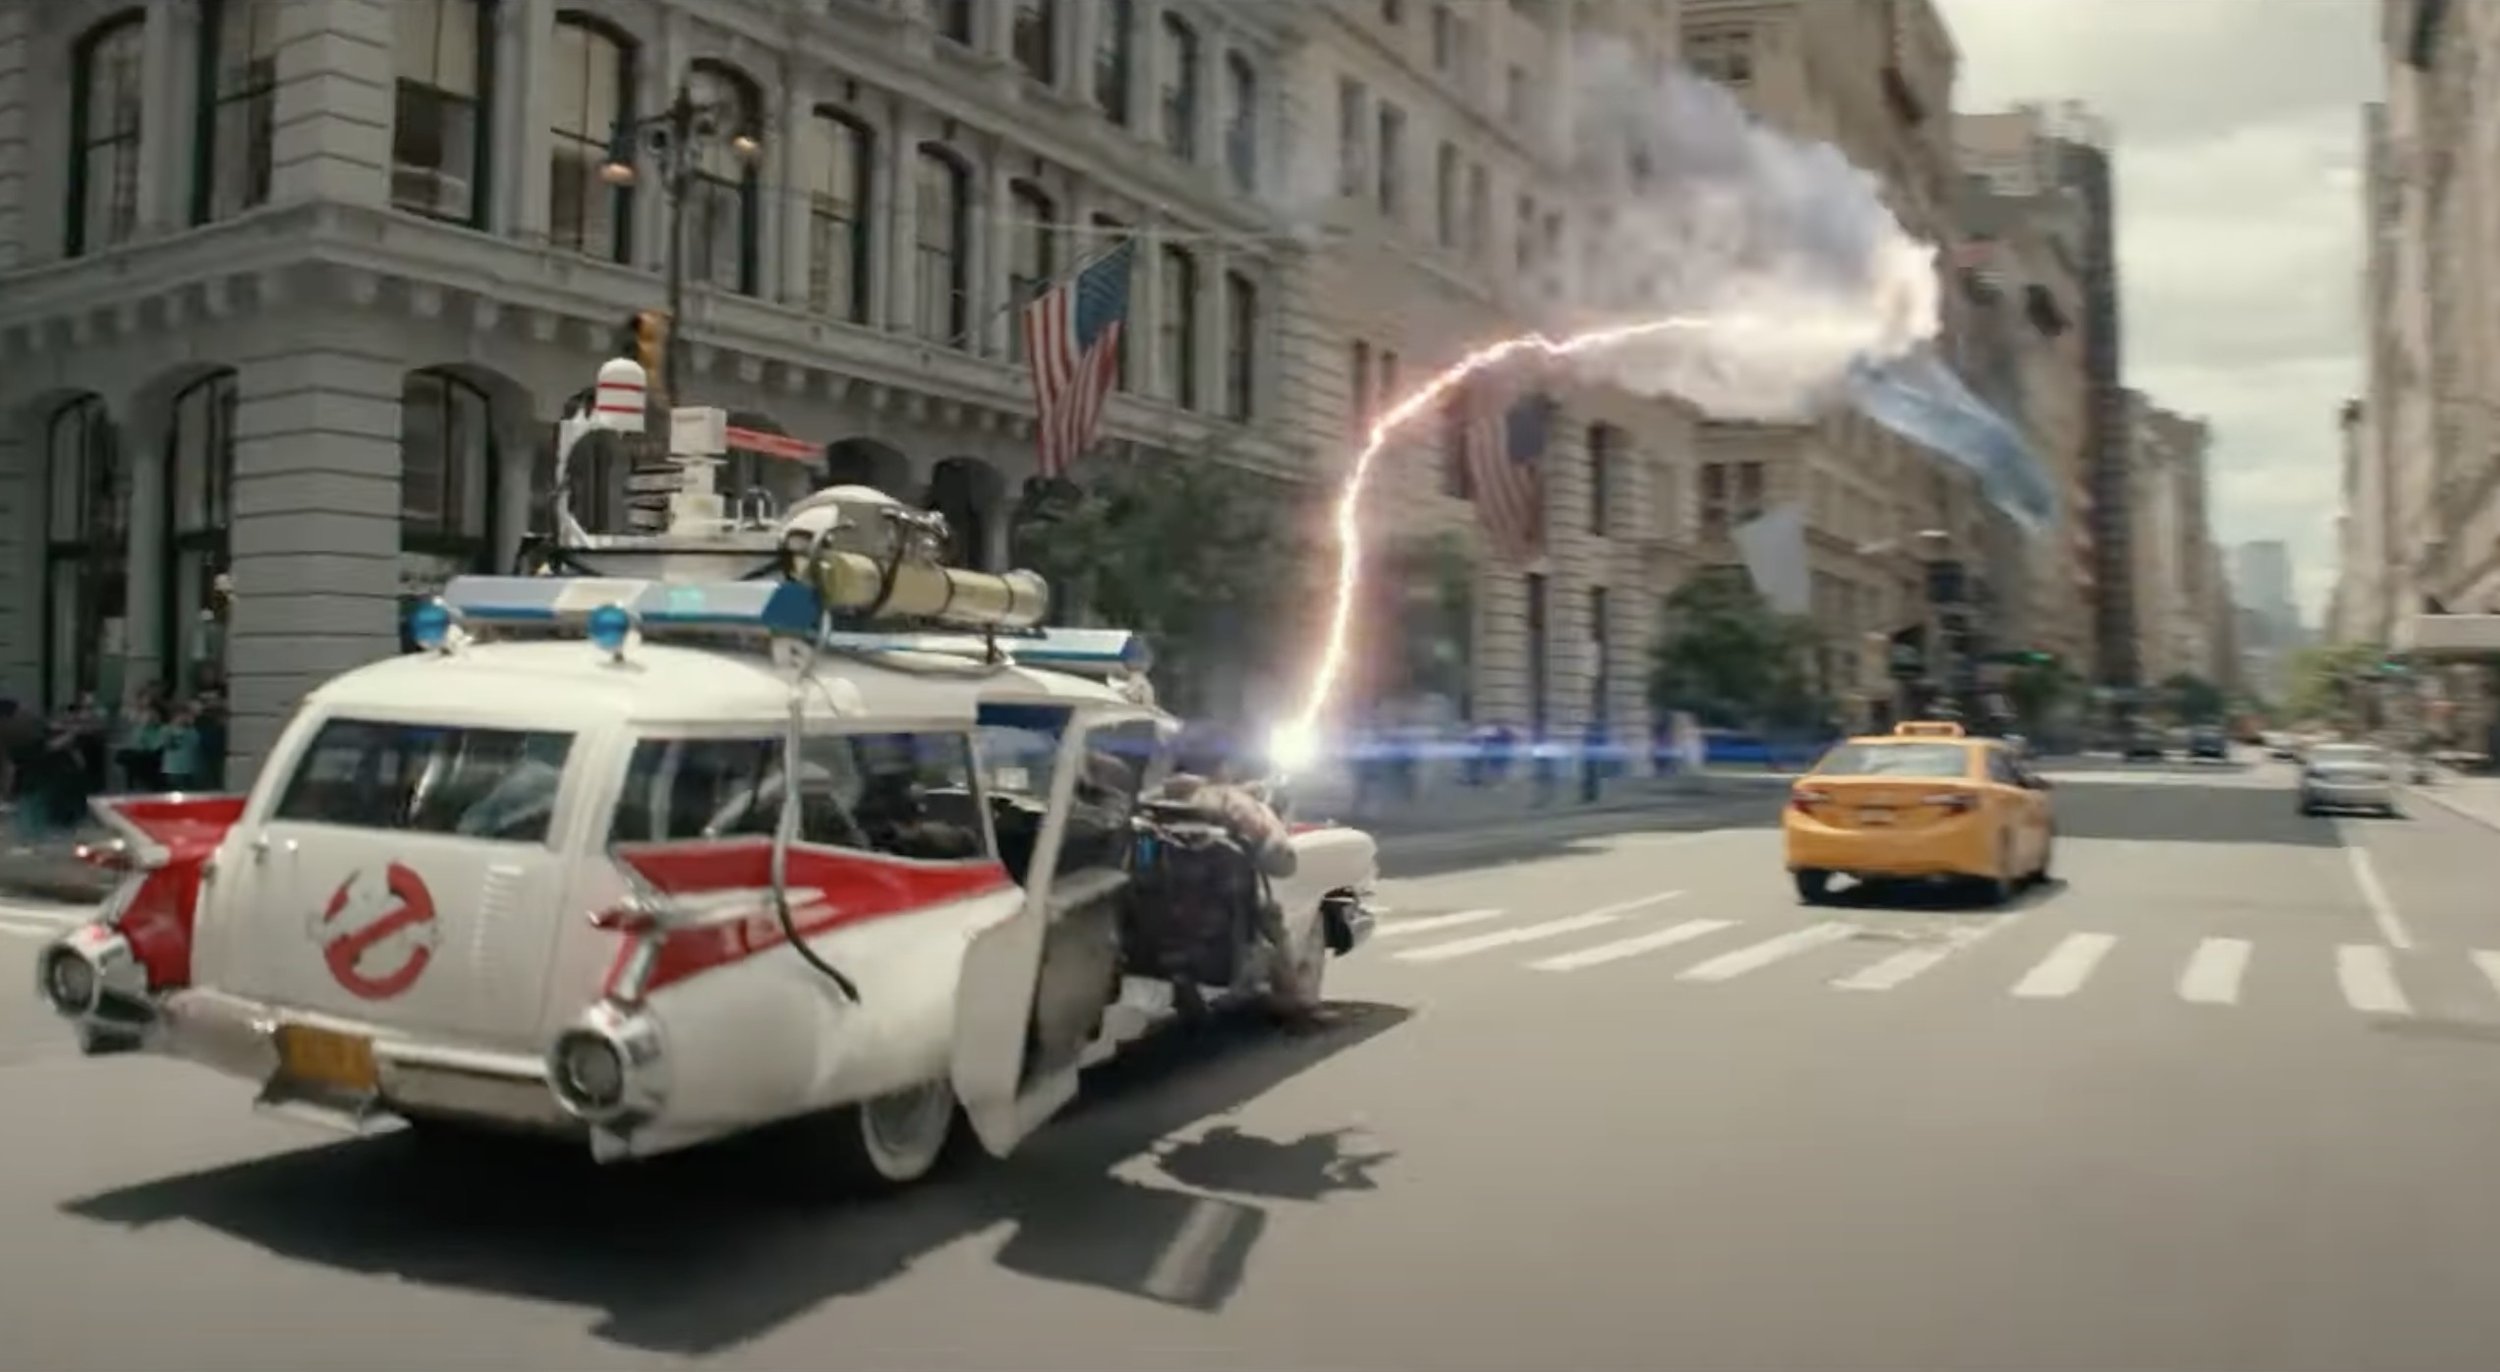 GHOSTBUSTERS: FROZEN EMPIRE Clip Sees That Chase After The Hell's Kitchen Sewer Dragon